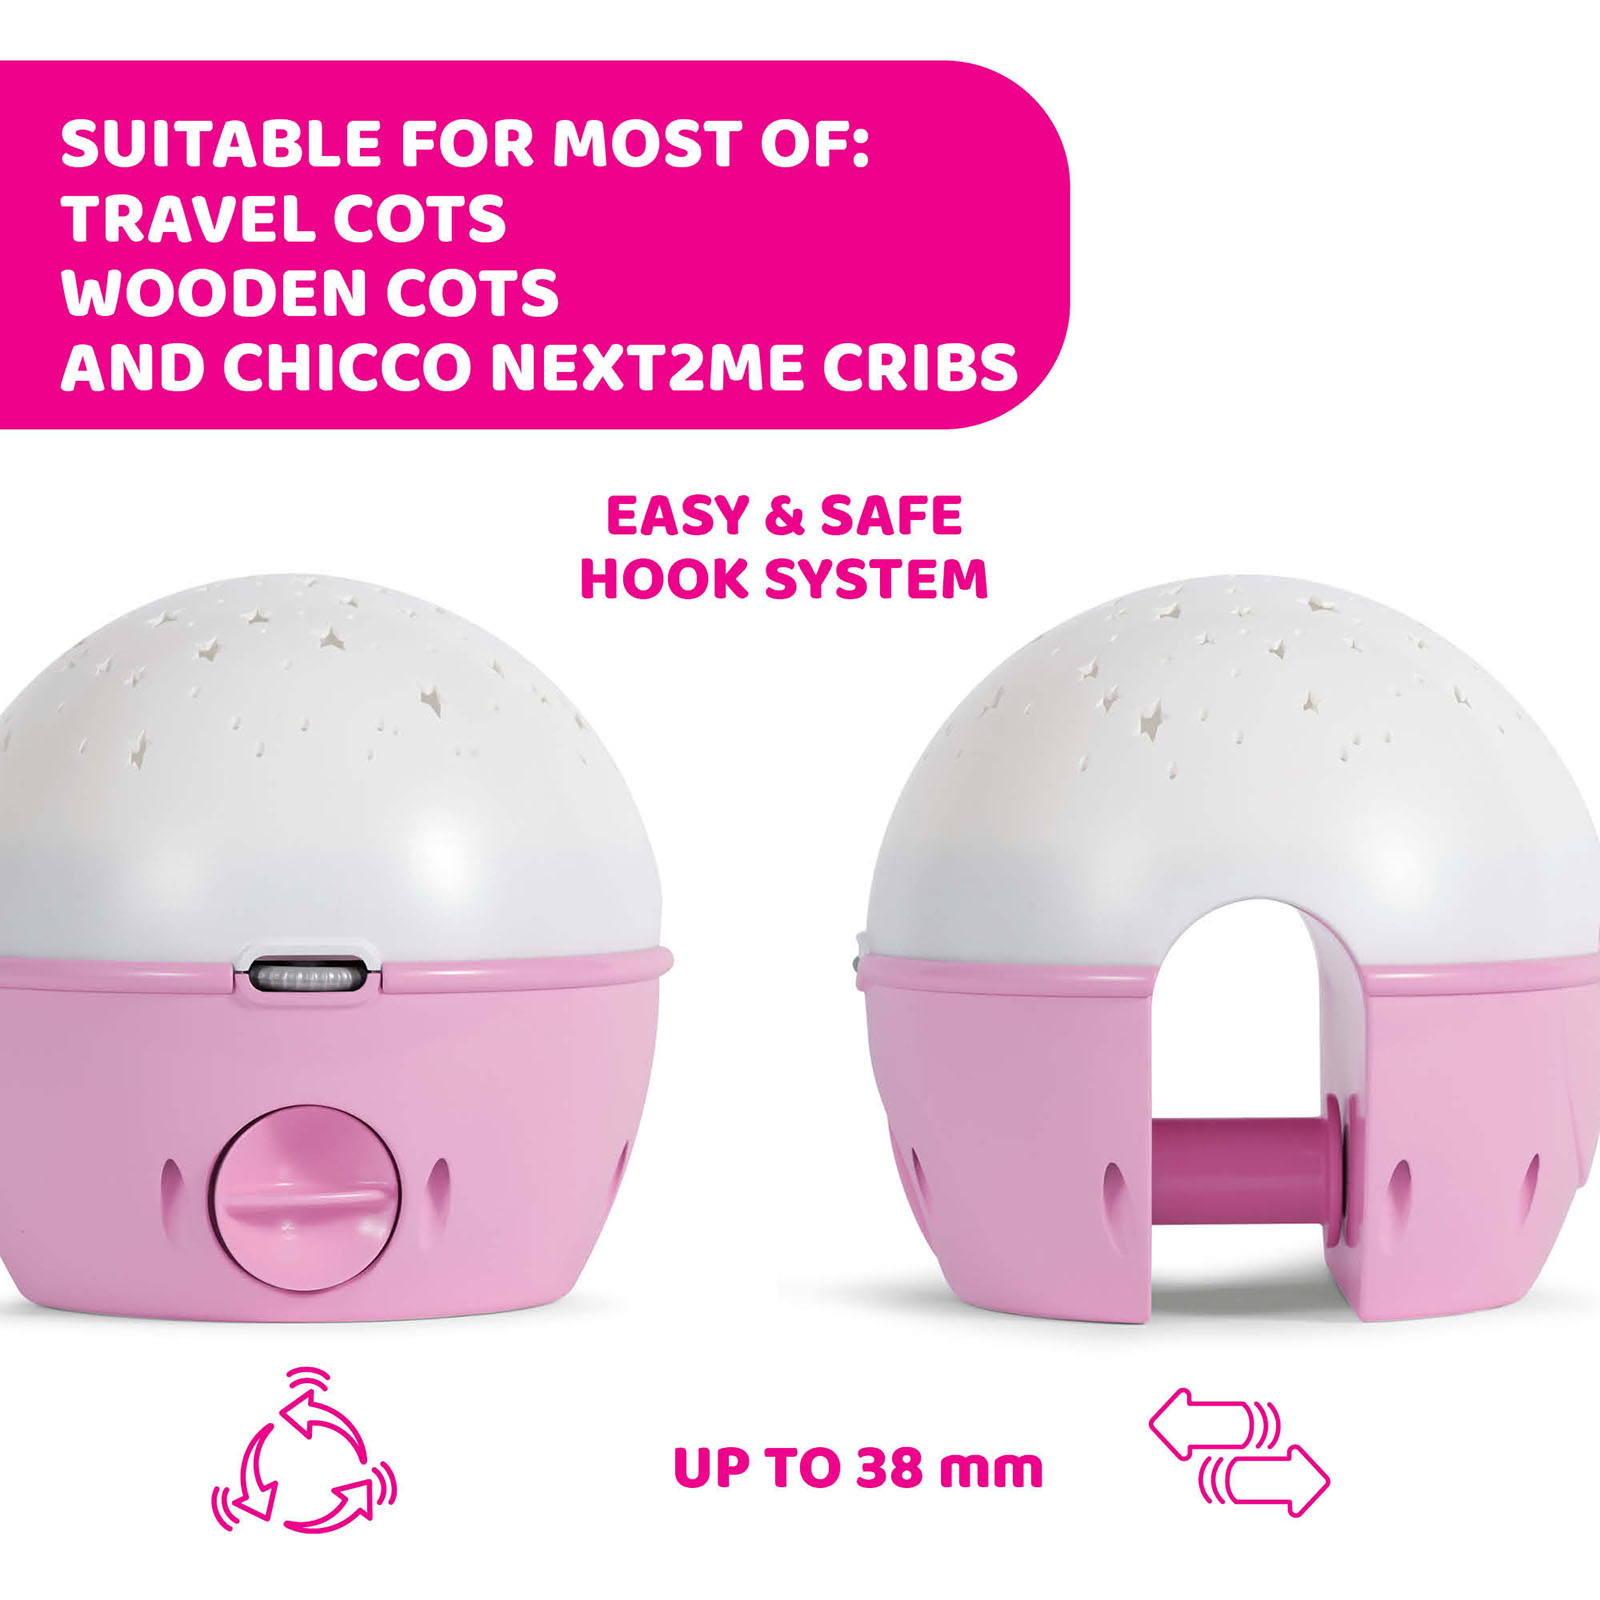 Chicco Next2Stars Nightlight Projector Buy Melodies at Musical with - Pink Online4baby 